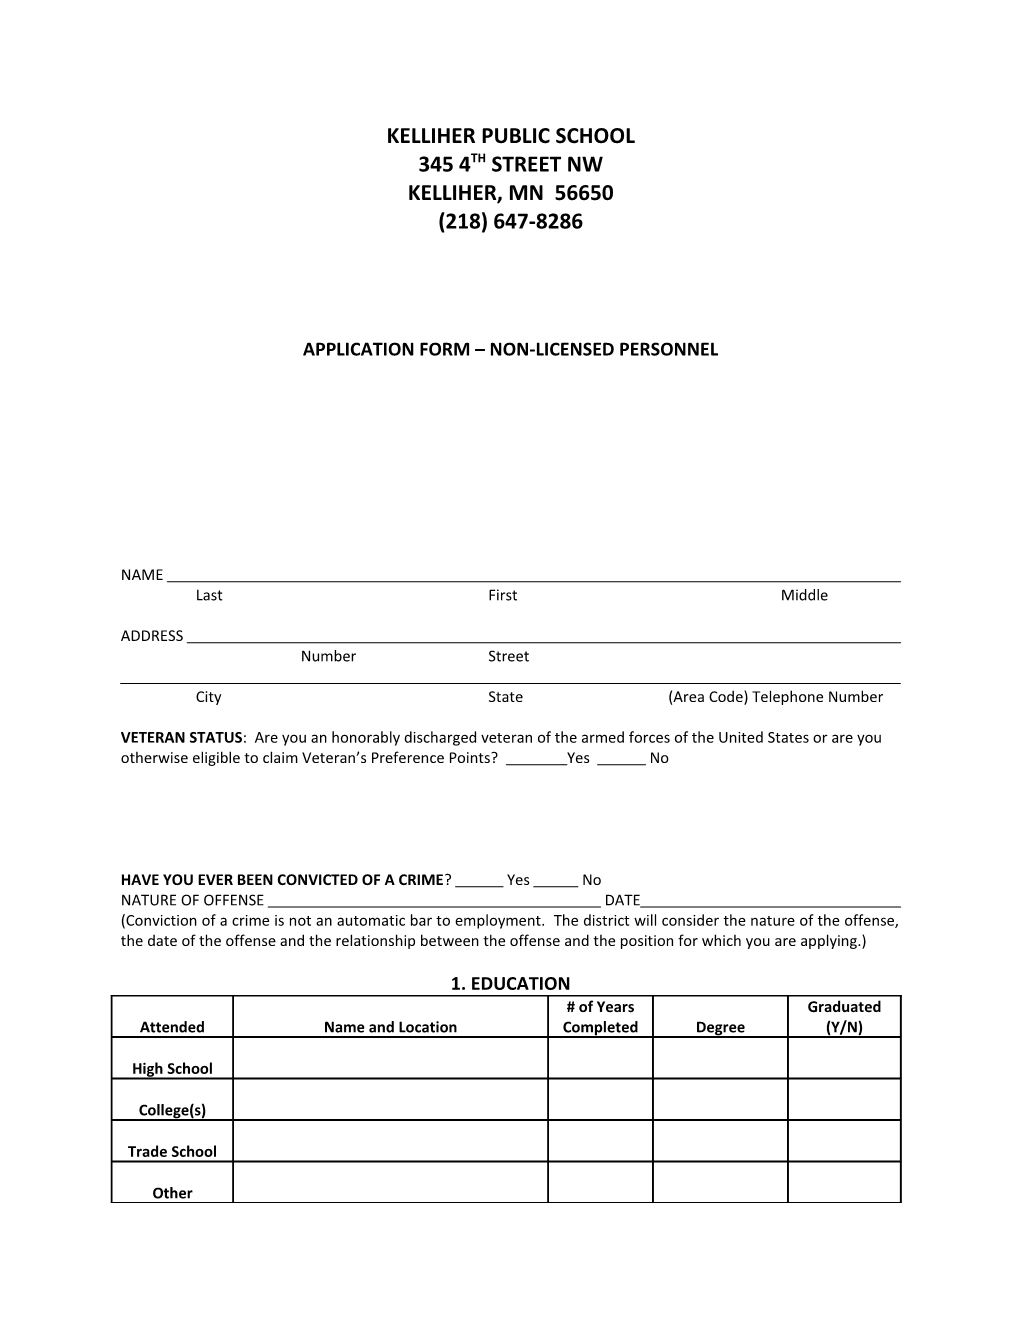 Application Form Non-Licensed Personnel